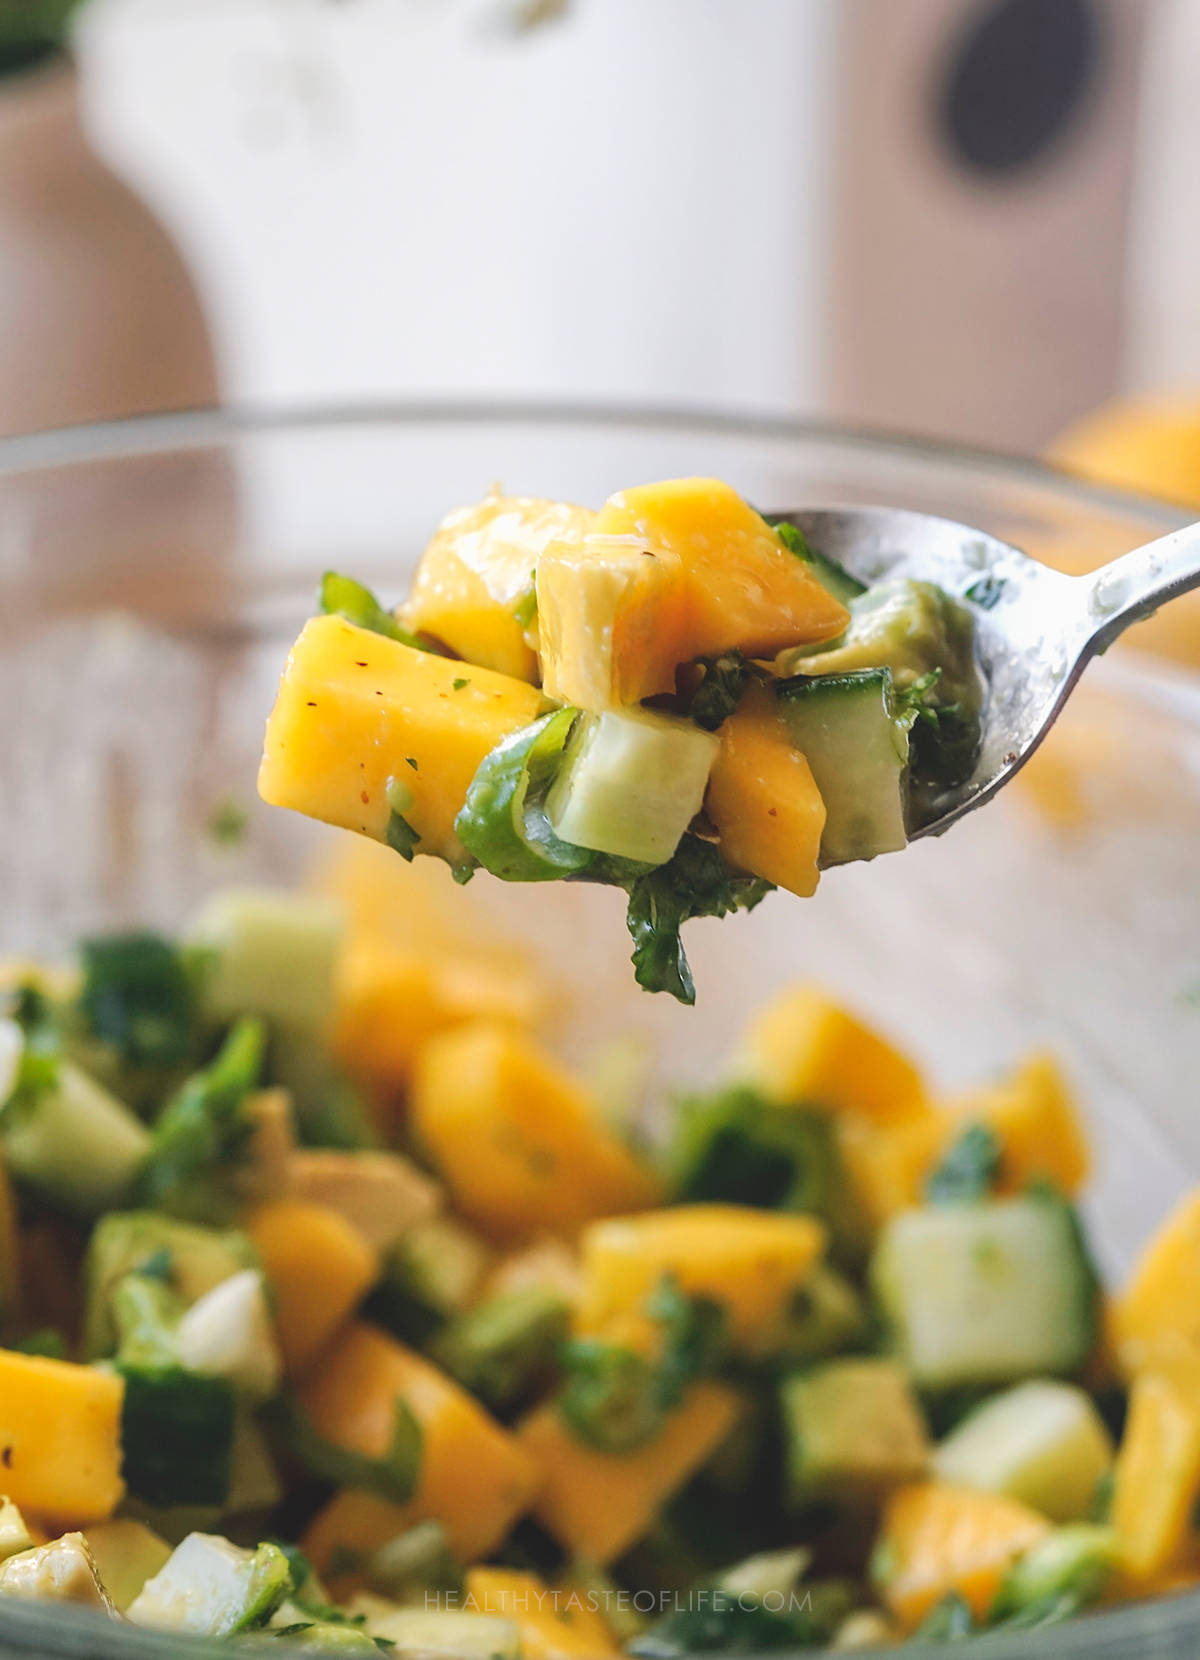 Close up shot: spoonfool of mango cucumber salad with cubed avocado and mixed with dressing.